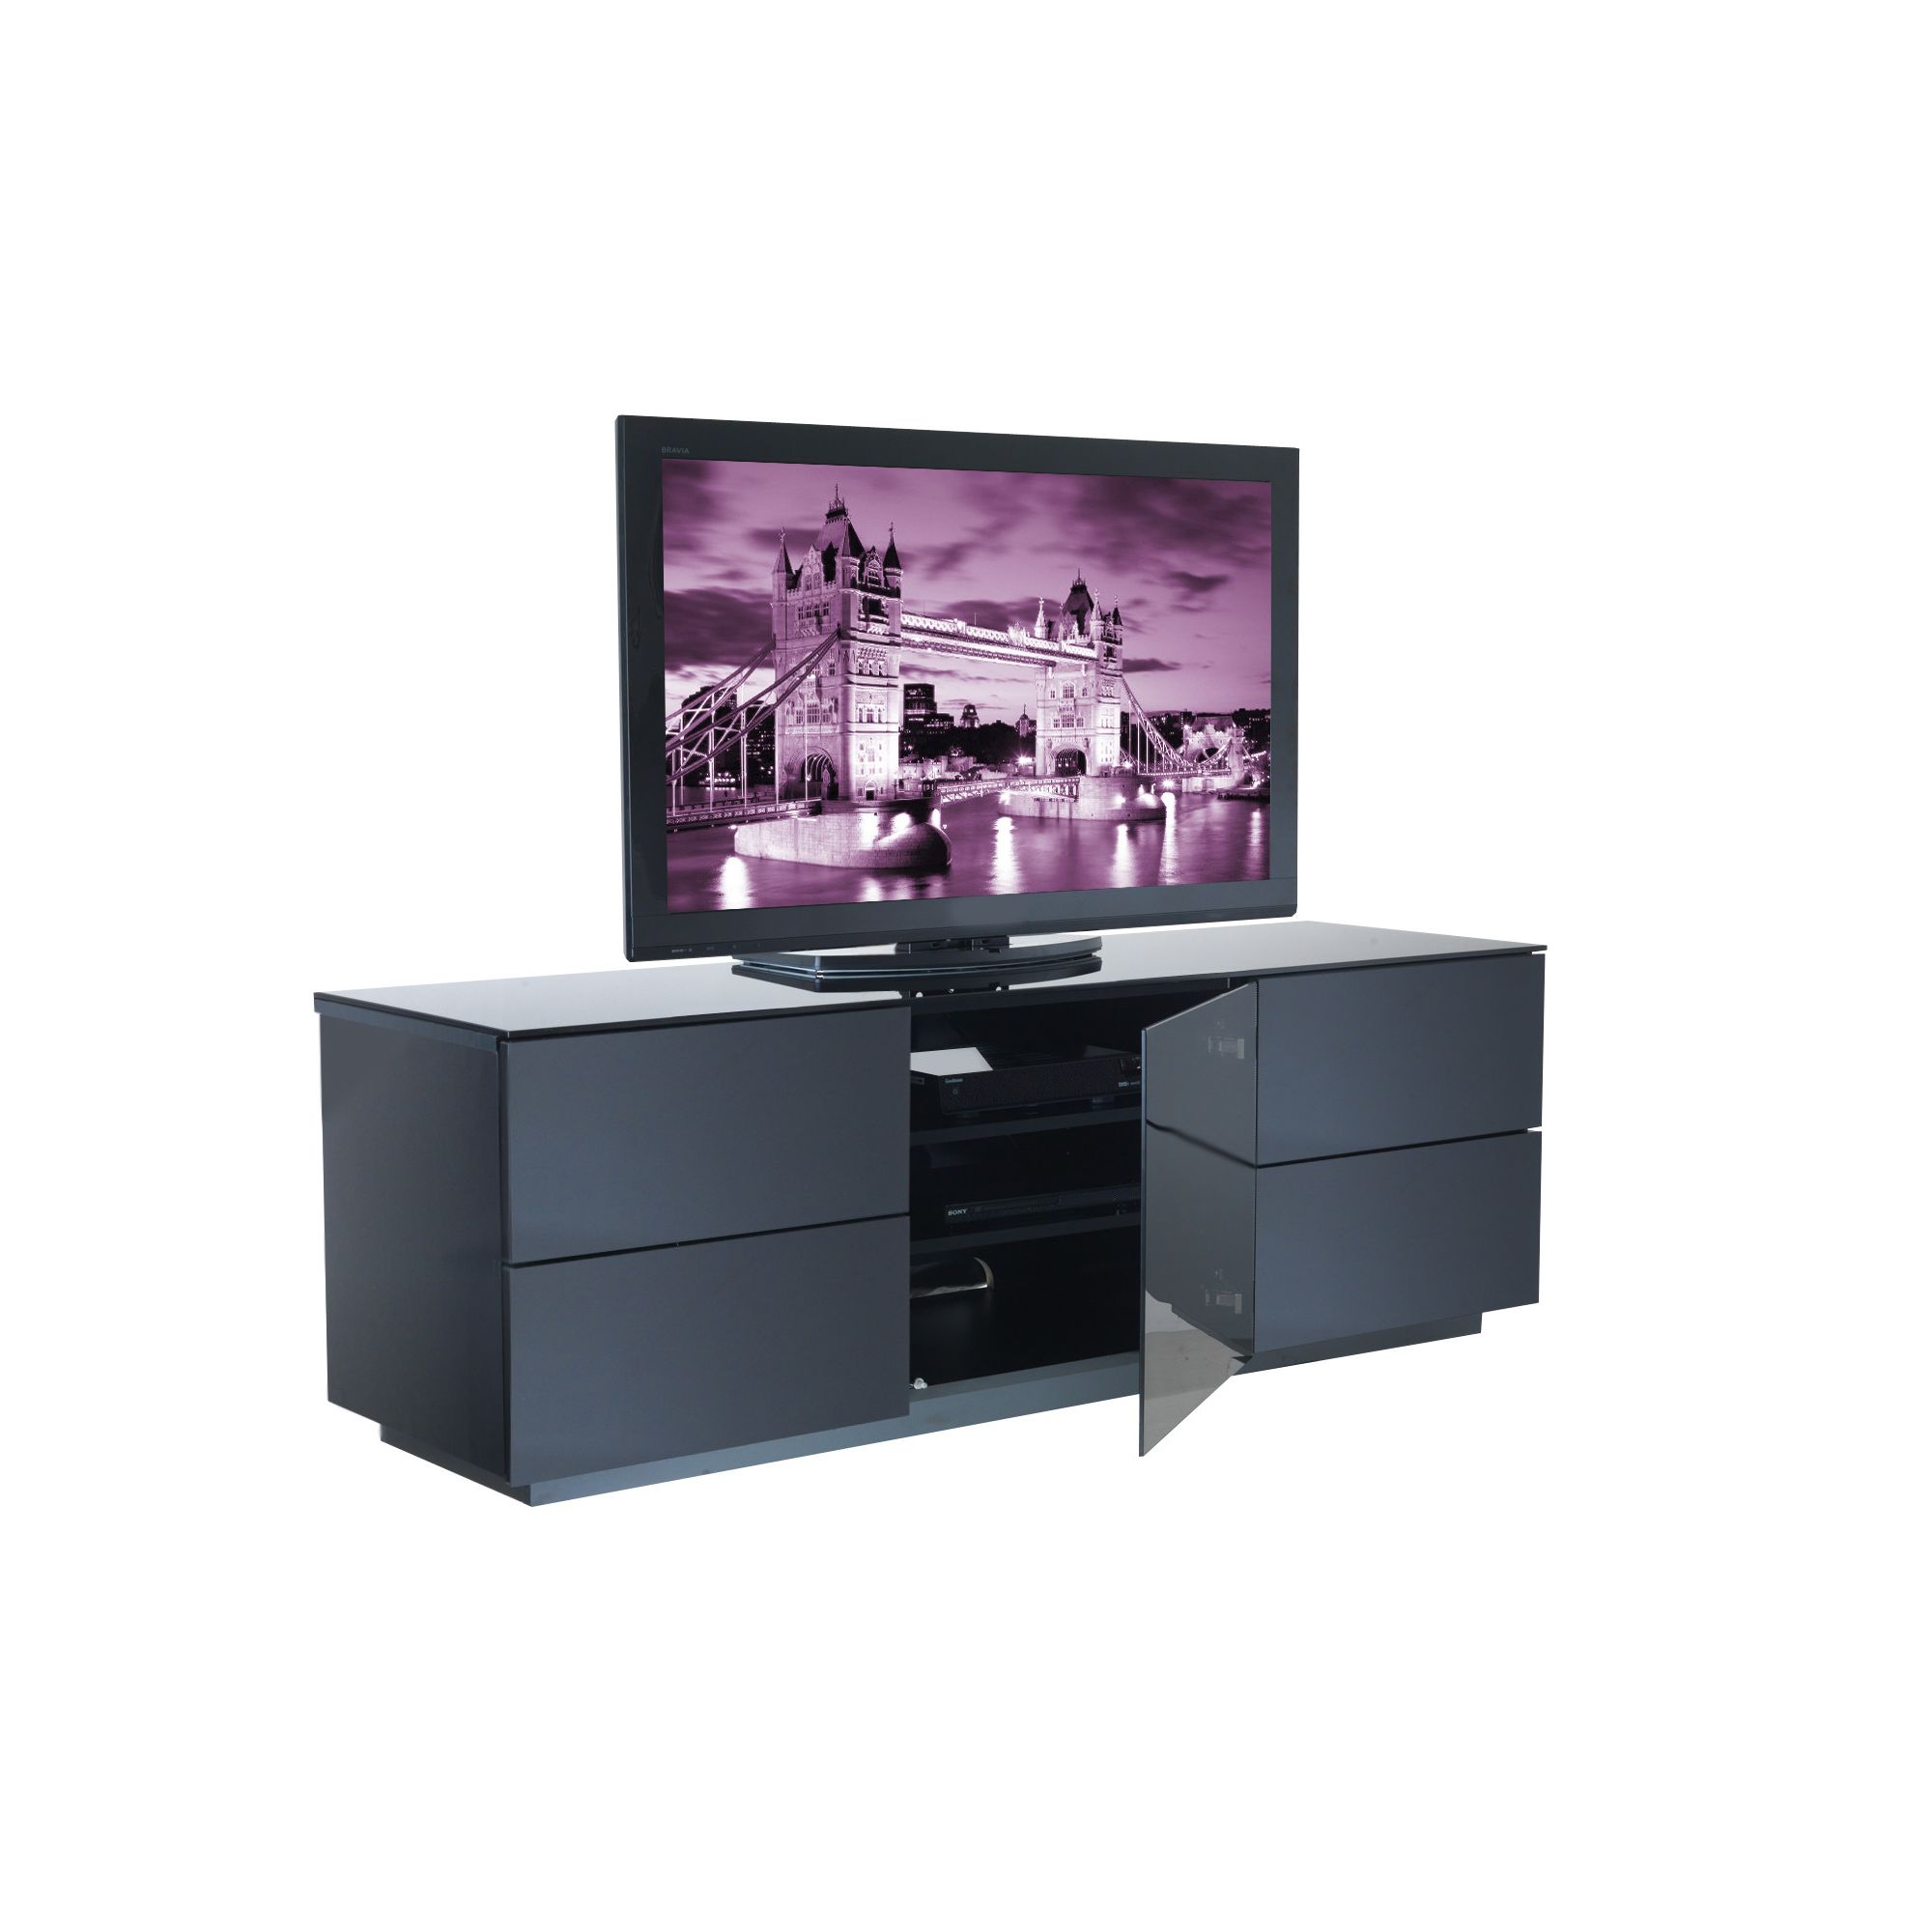 UK-CF City Scape London TV Stand - Black at Tesco Direct